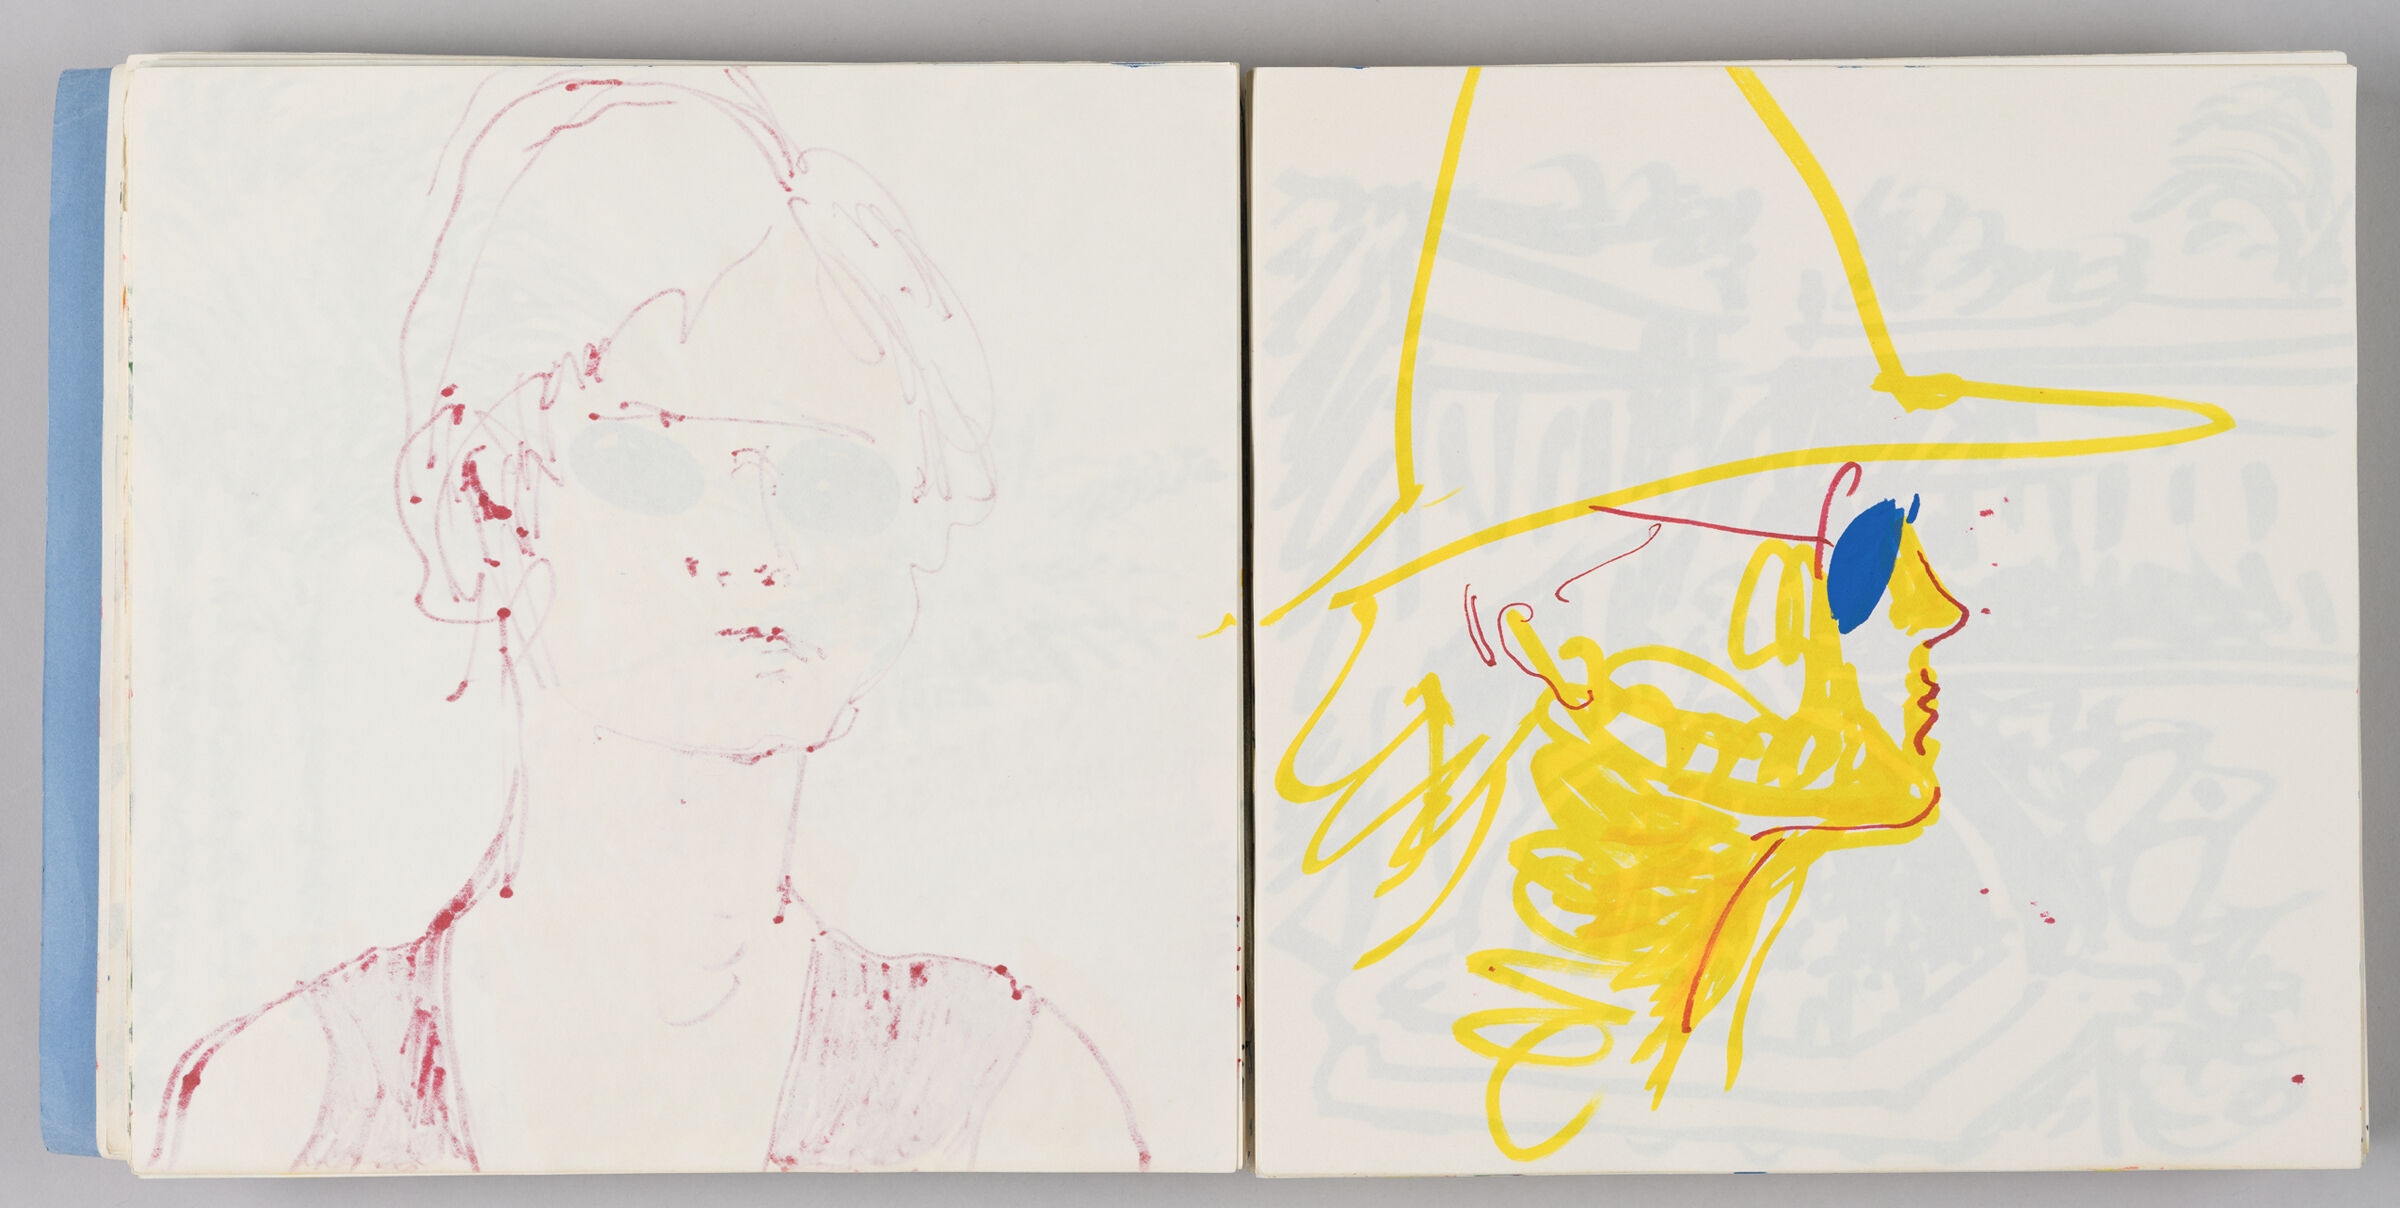 Untitled (Bleed-Through Of Previous Page, Left Page); Untitled (Profile Portrait Of Female Figure [Elizabeth], Right Page)
